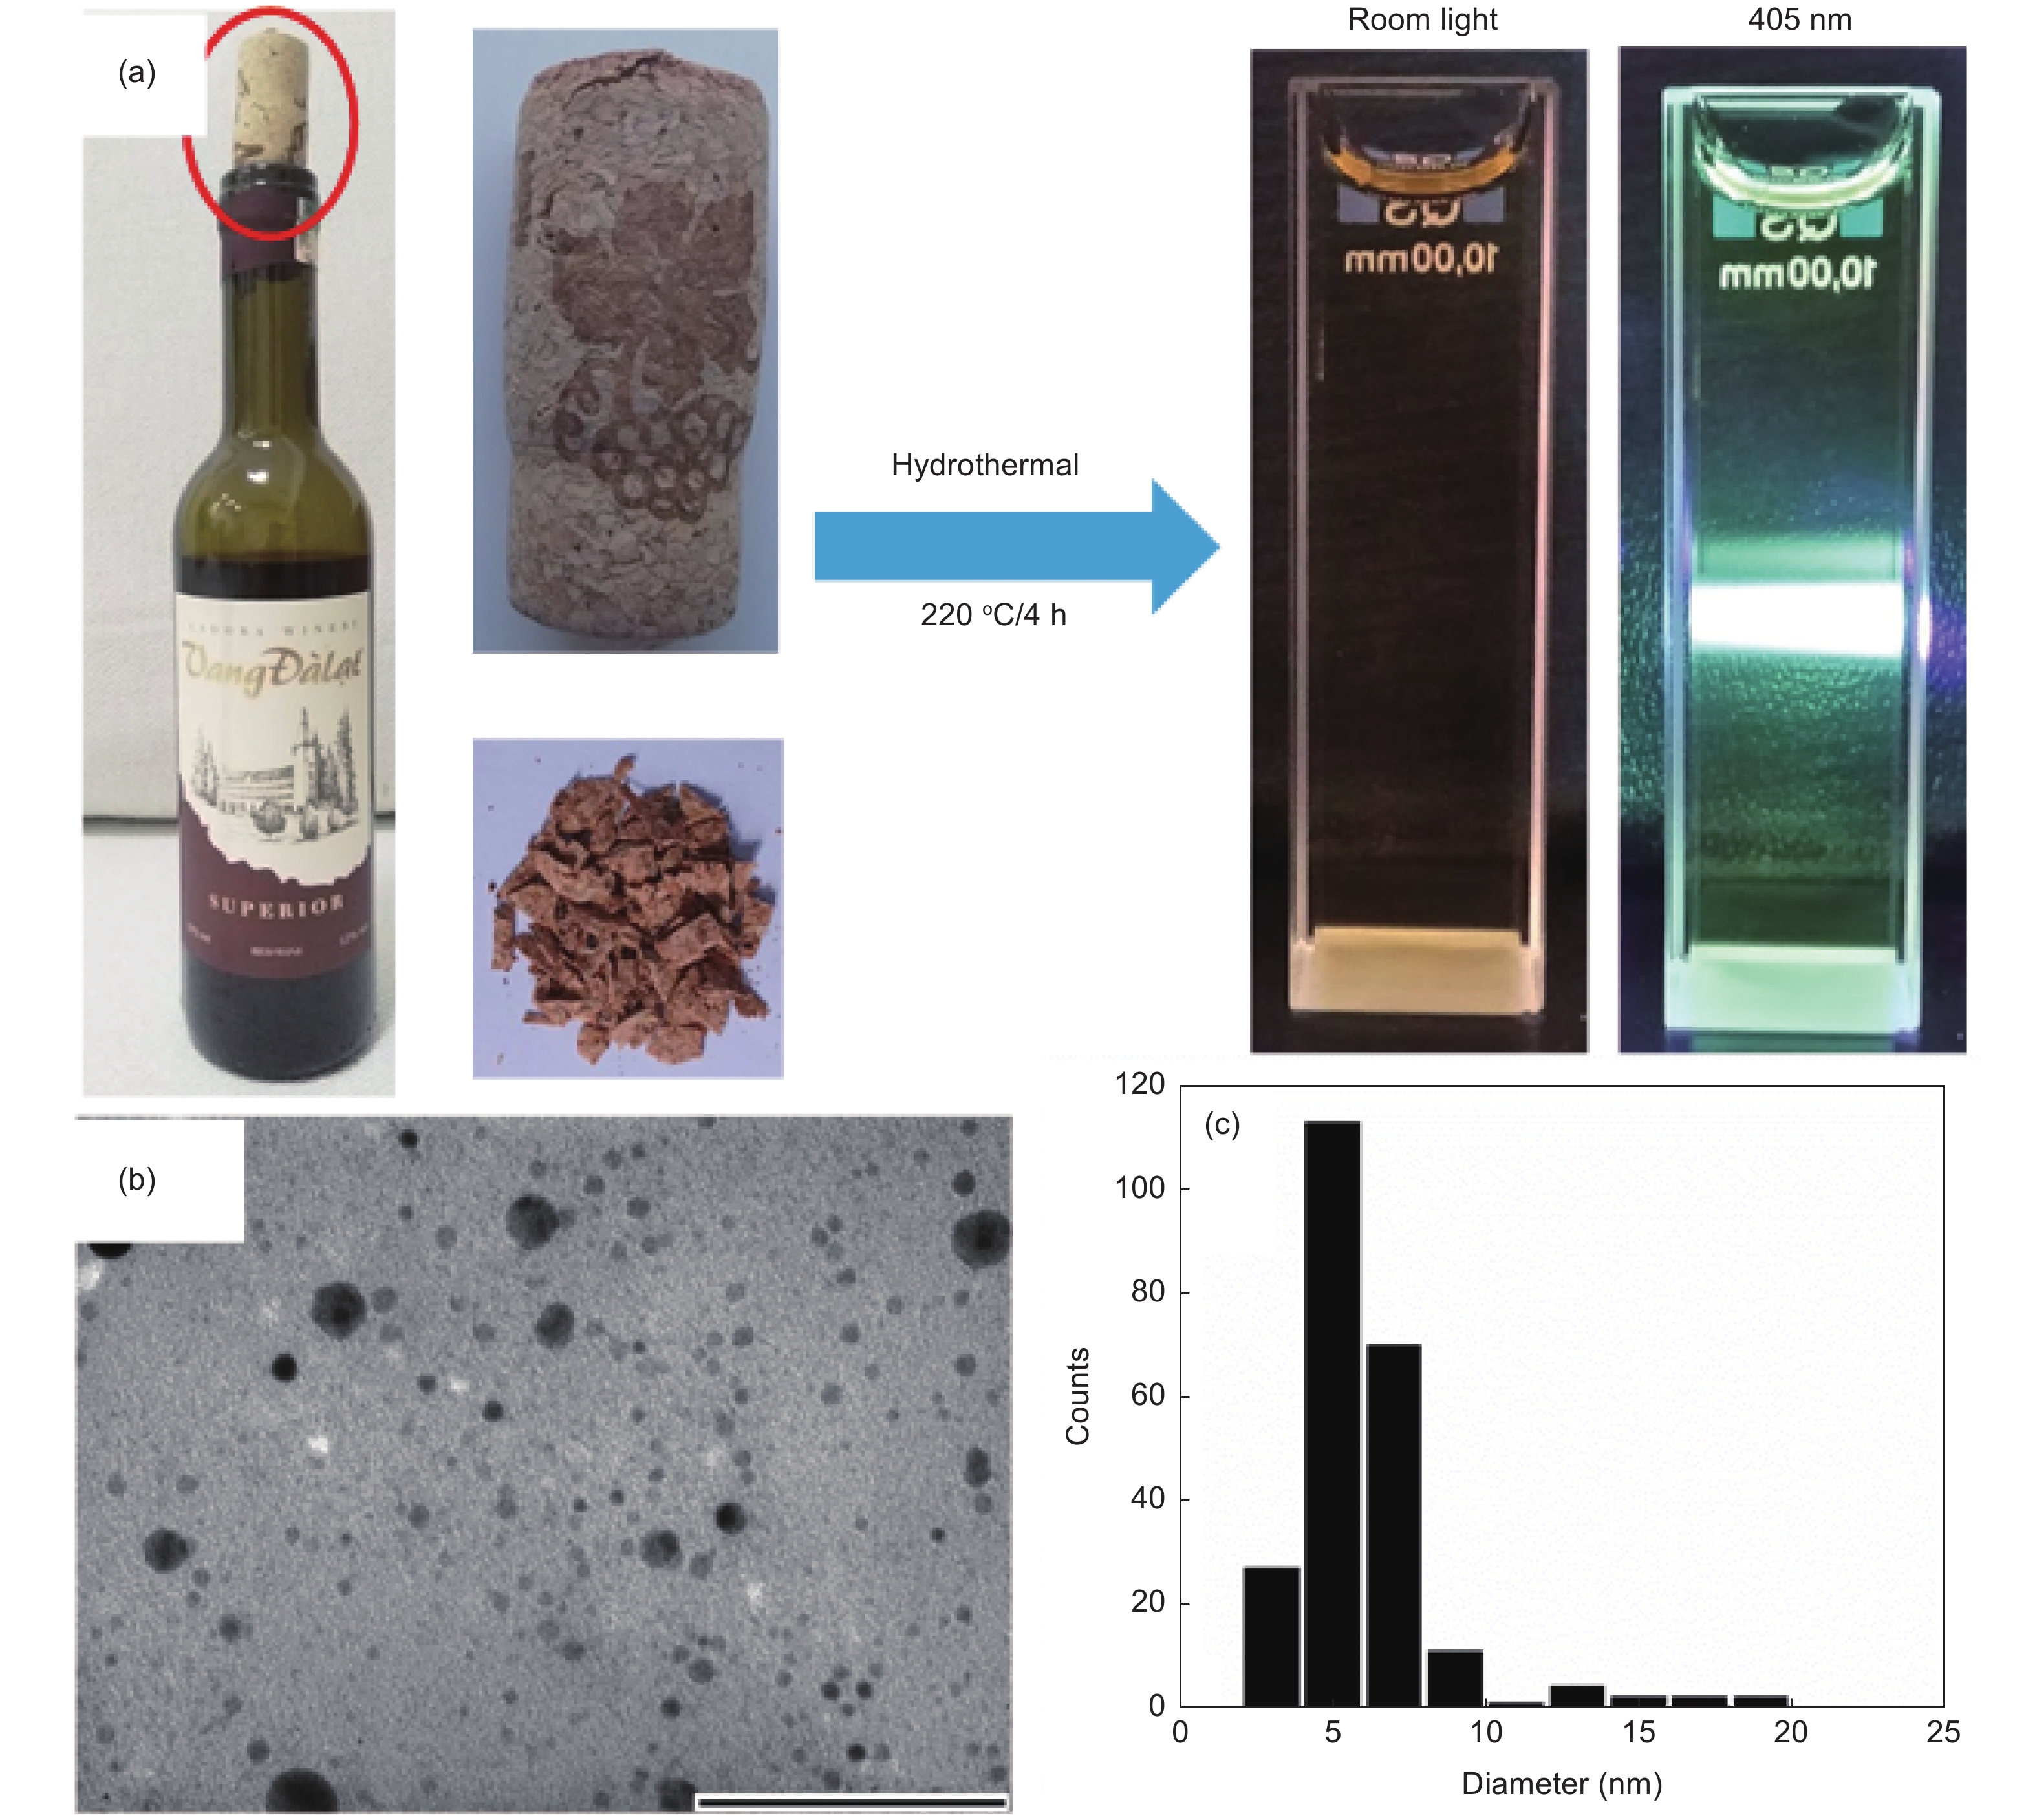 Hydrothermal synthesis of carbon nanodots from waste wine cork and their  use in biocompatible fluorescence imaging